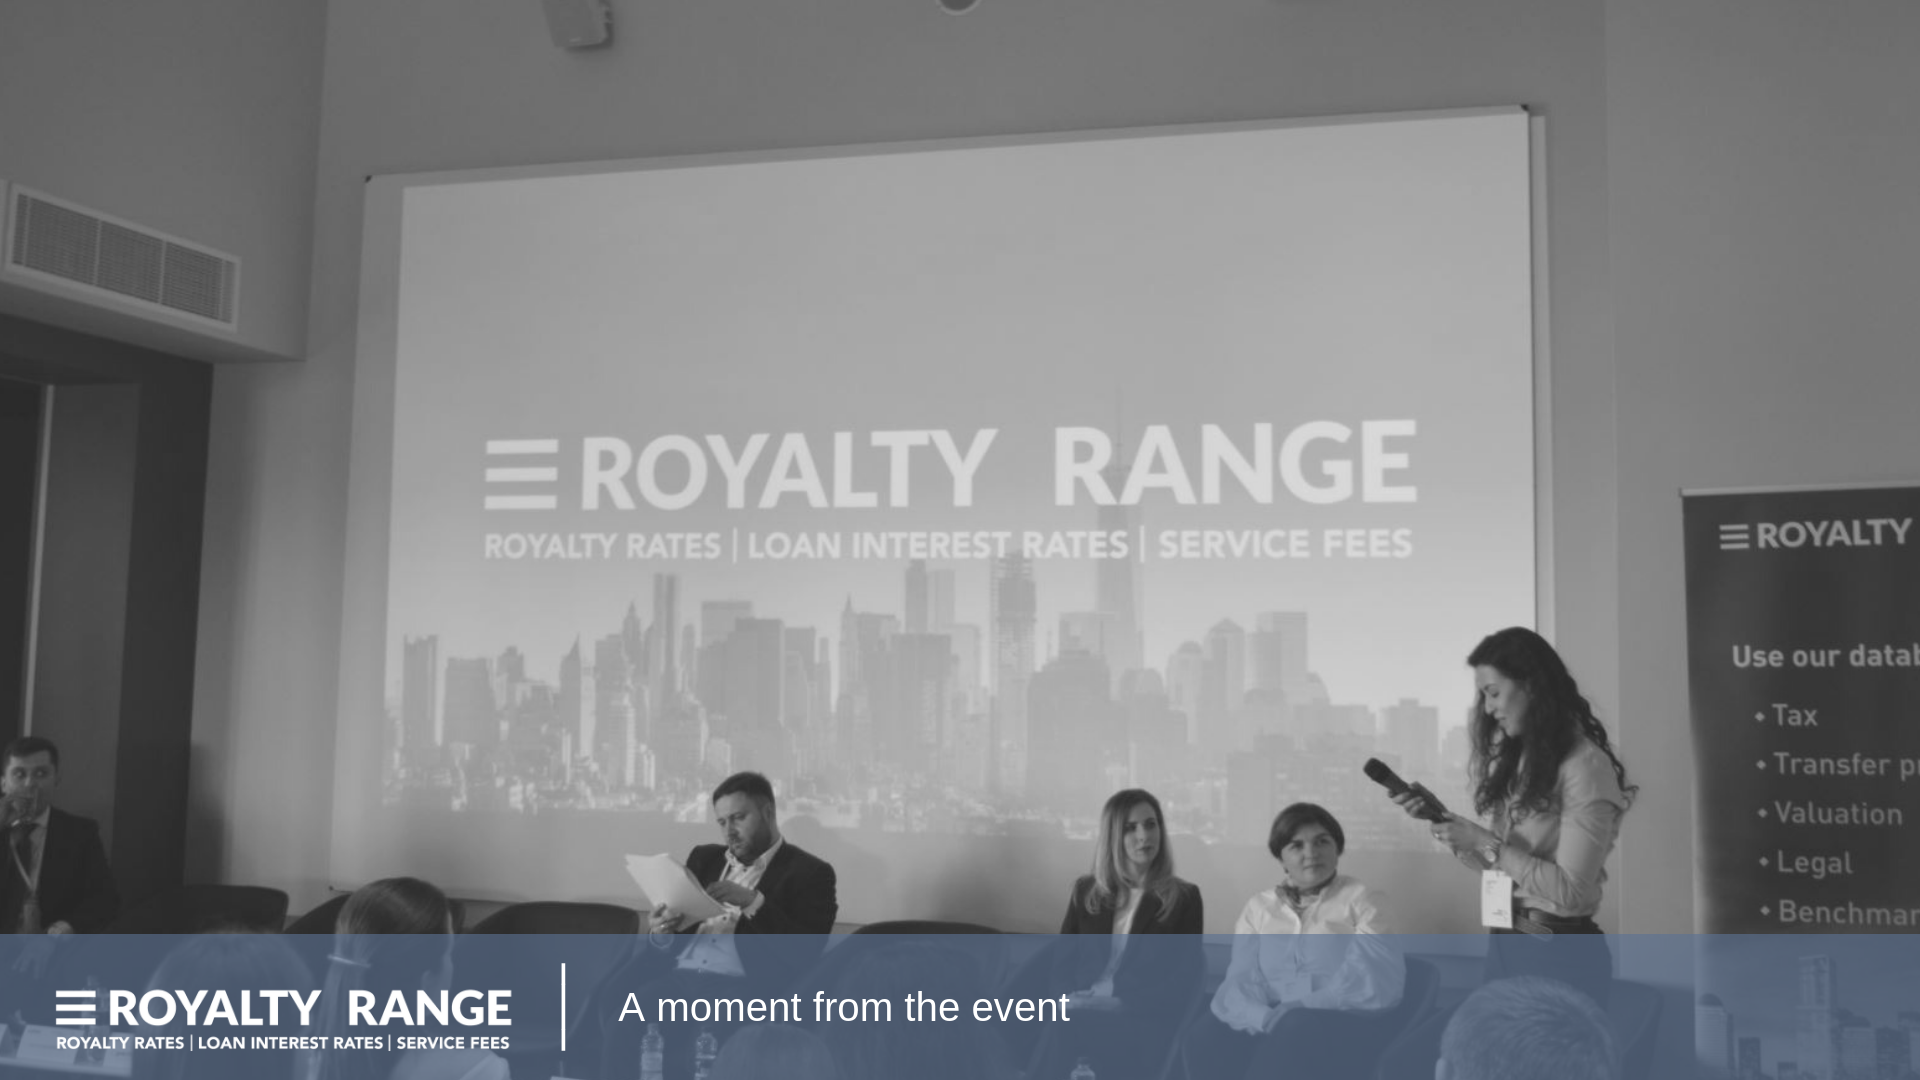 ROYALTYRANGE SPONSORING TRANSFER PRICING. BEPS. CHALLENGES AND OPPORTUNITIES